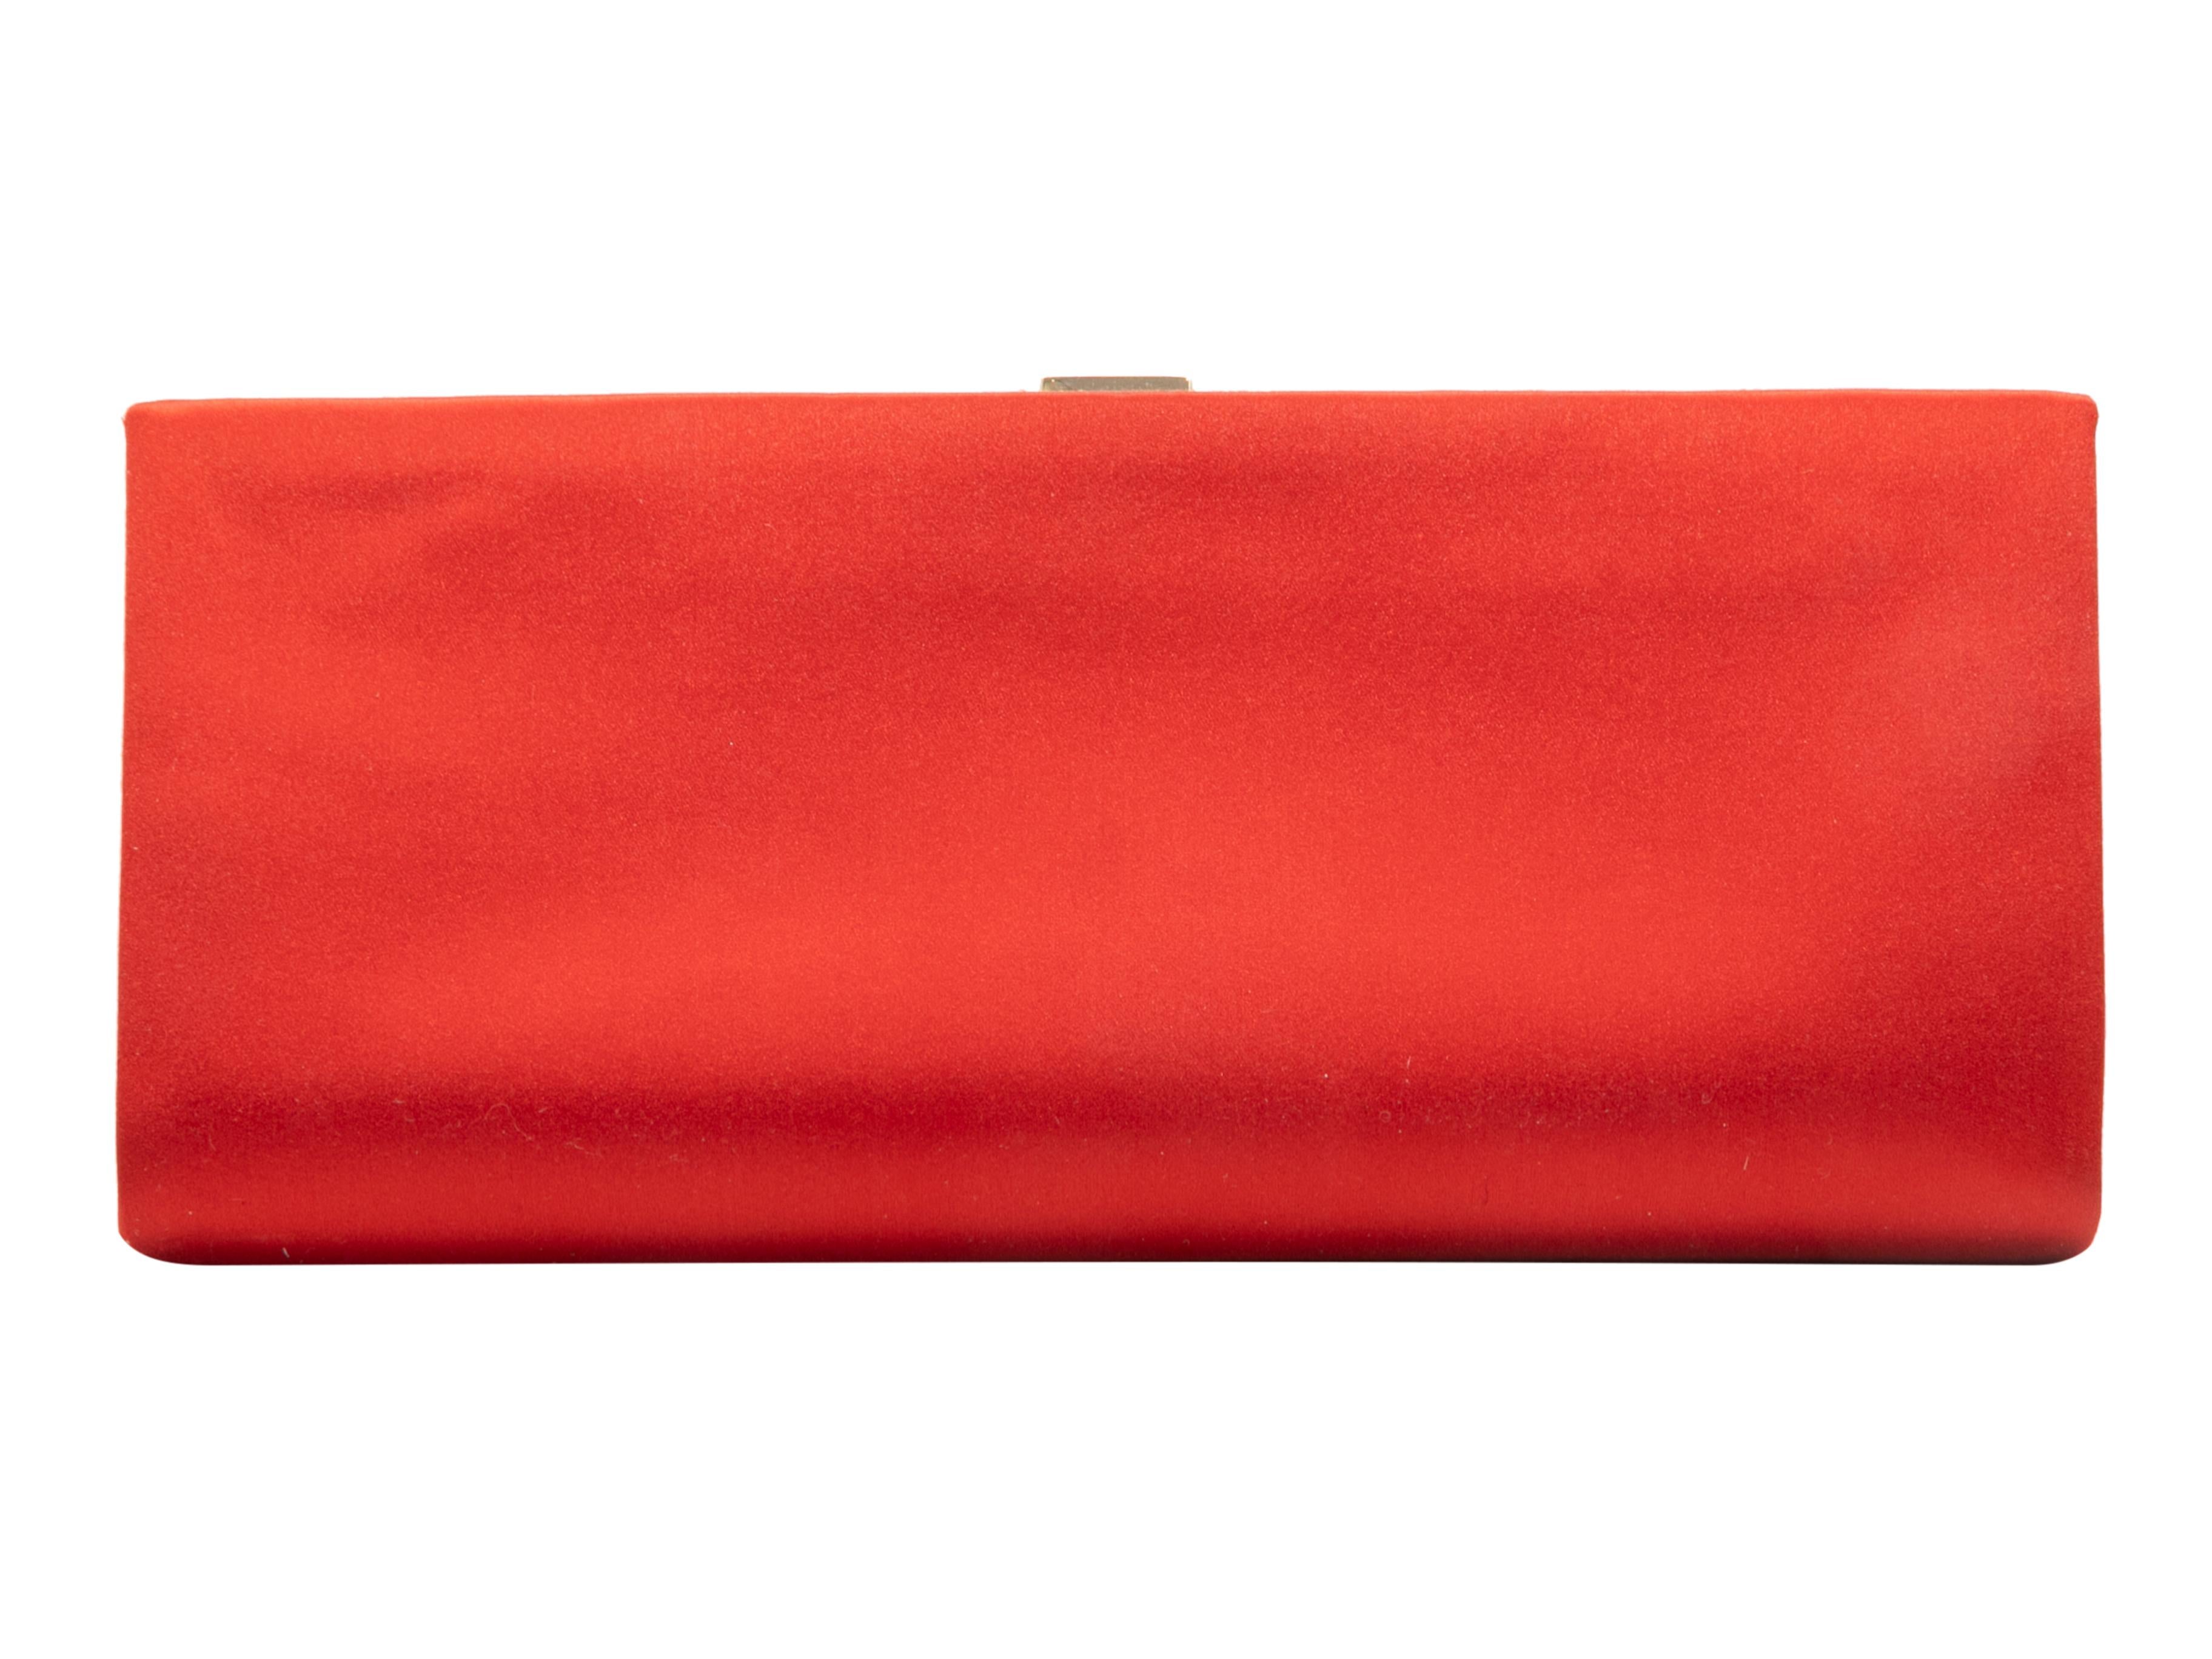 Red Roger Vivier Satin Clutch. This clutch features a satin body, gold-tone hardware, and a jewel-embellished top clasp closure. 10.75